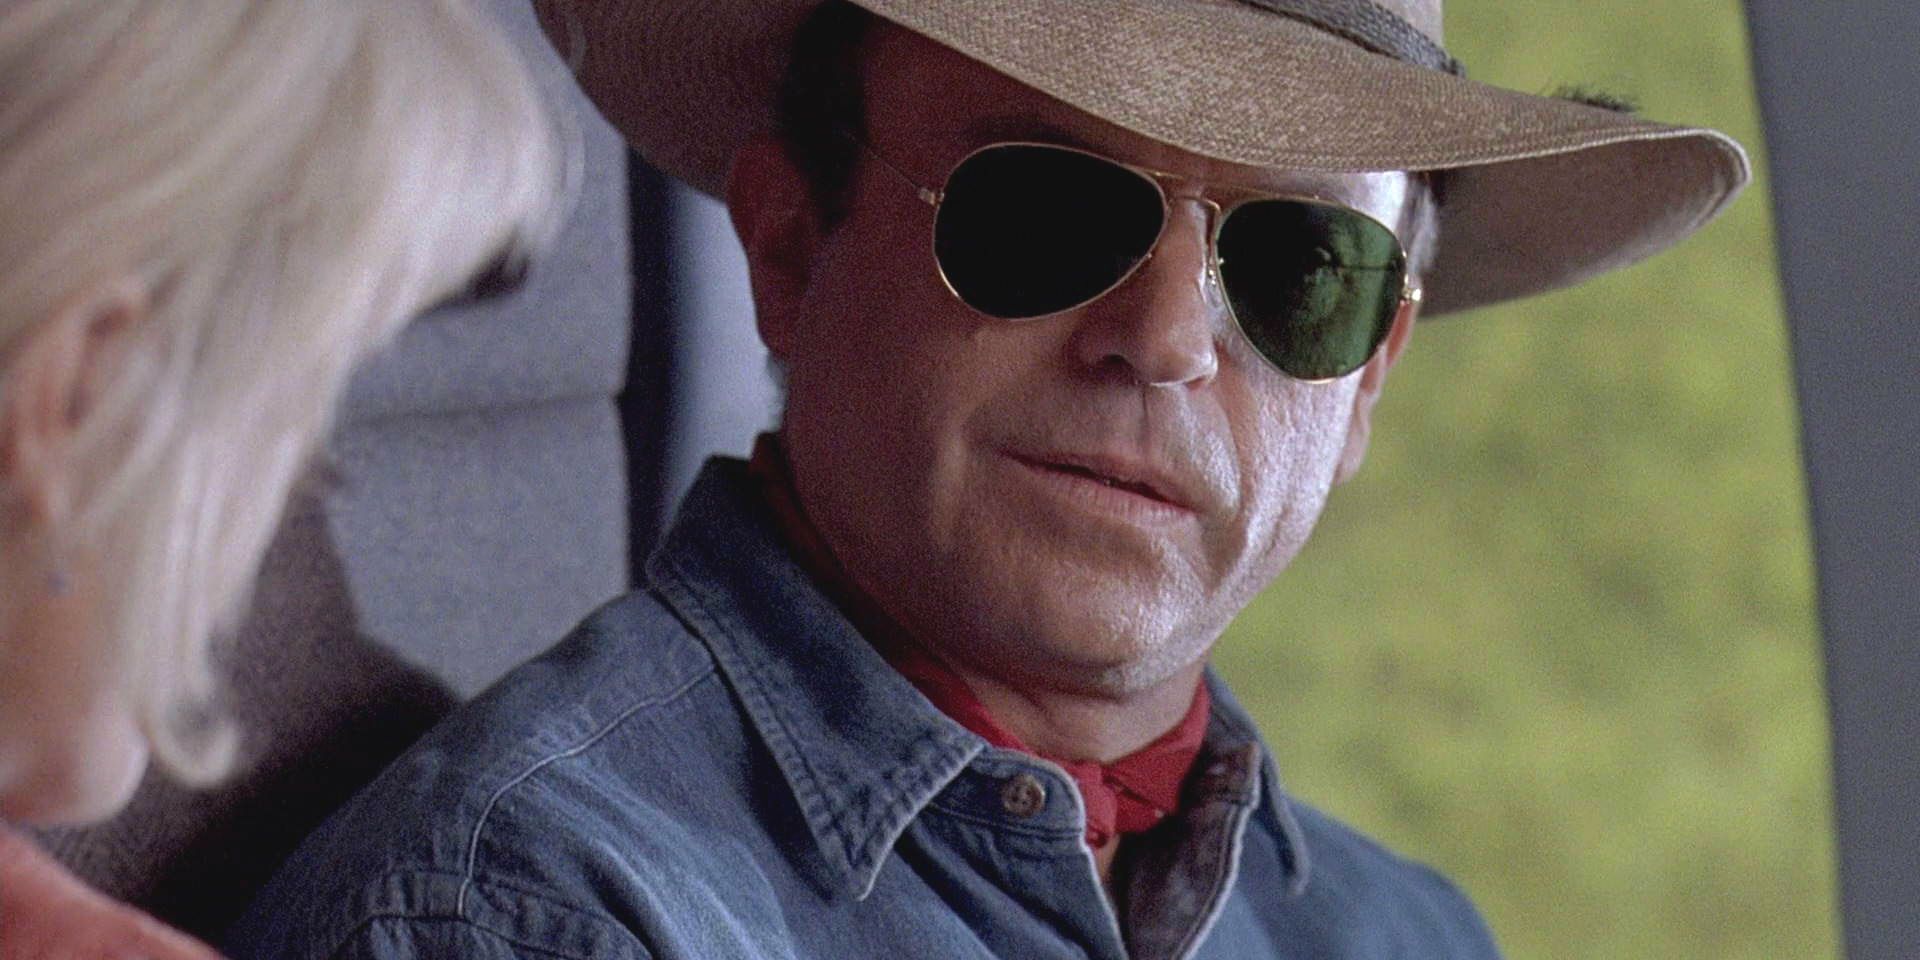 Jurassic Park - Sam Neill as Alan Grant on helicopter